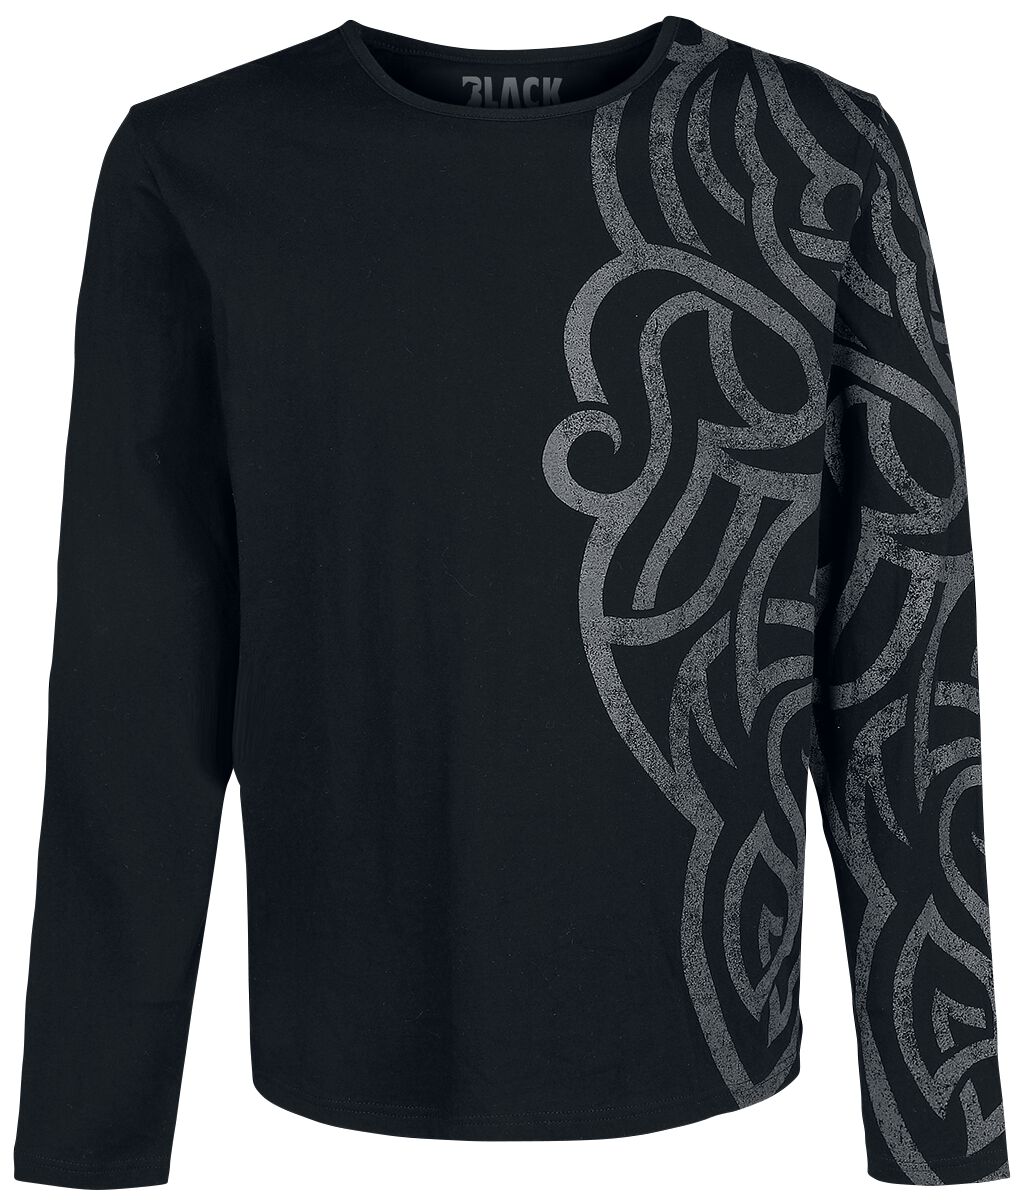 Image of Maglia Maniche Lunghe di Black Premium by EMP - Long-sleeve Shirt with Large Ornamentation - XL a 5XL - Uomo - nero